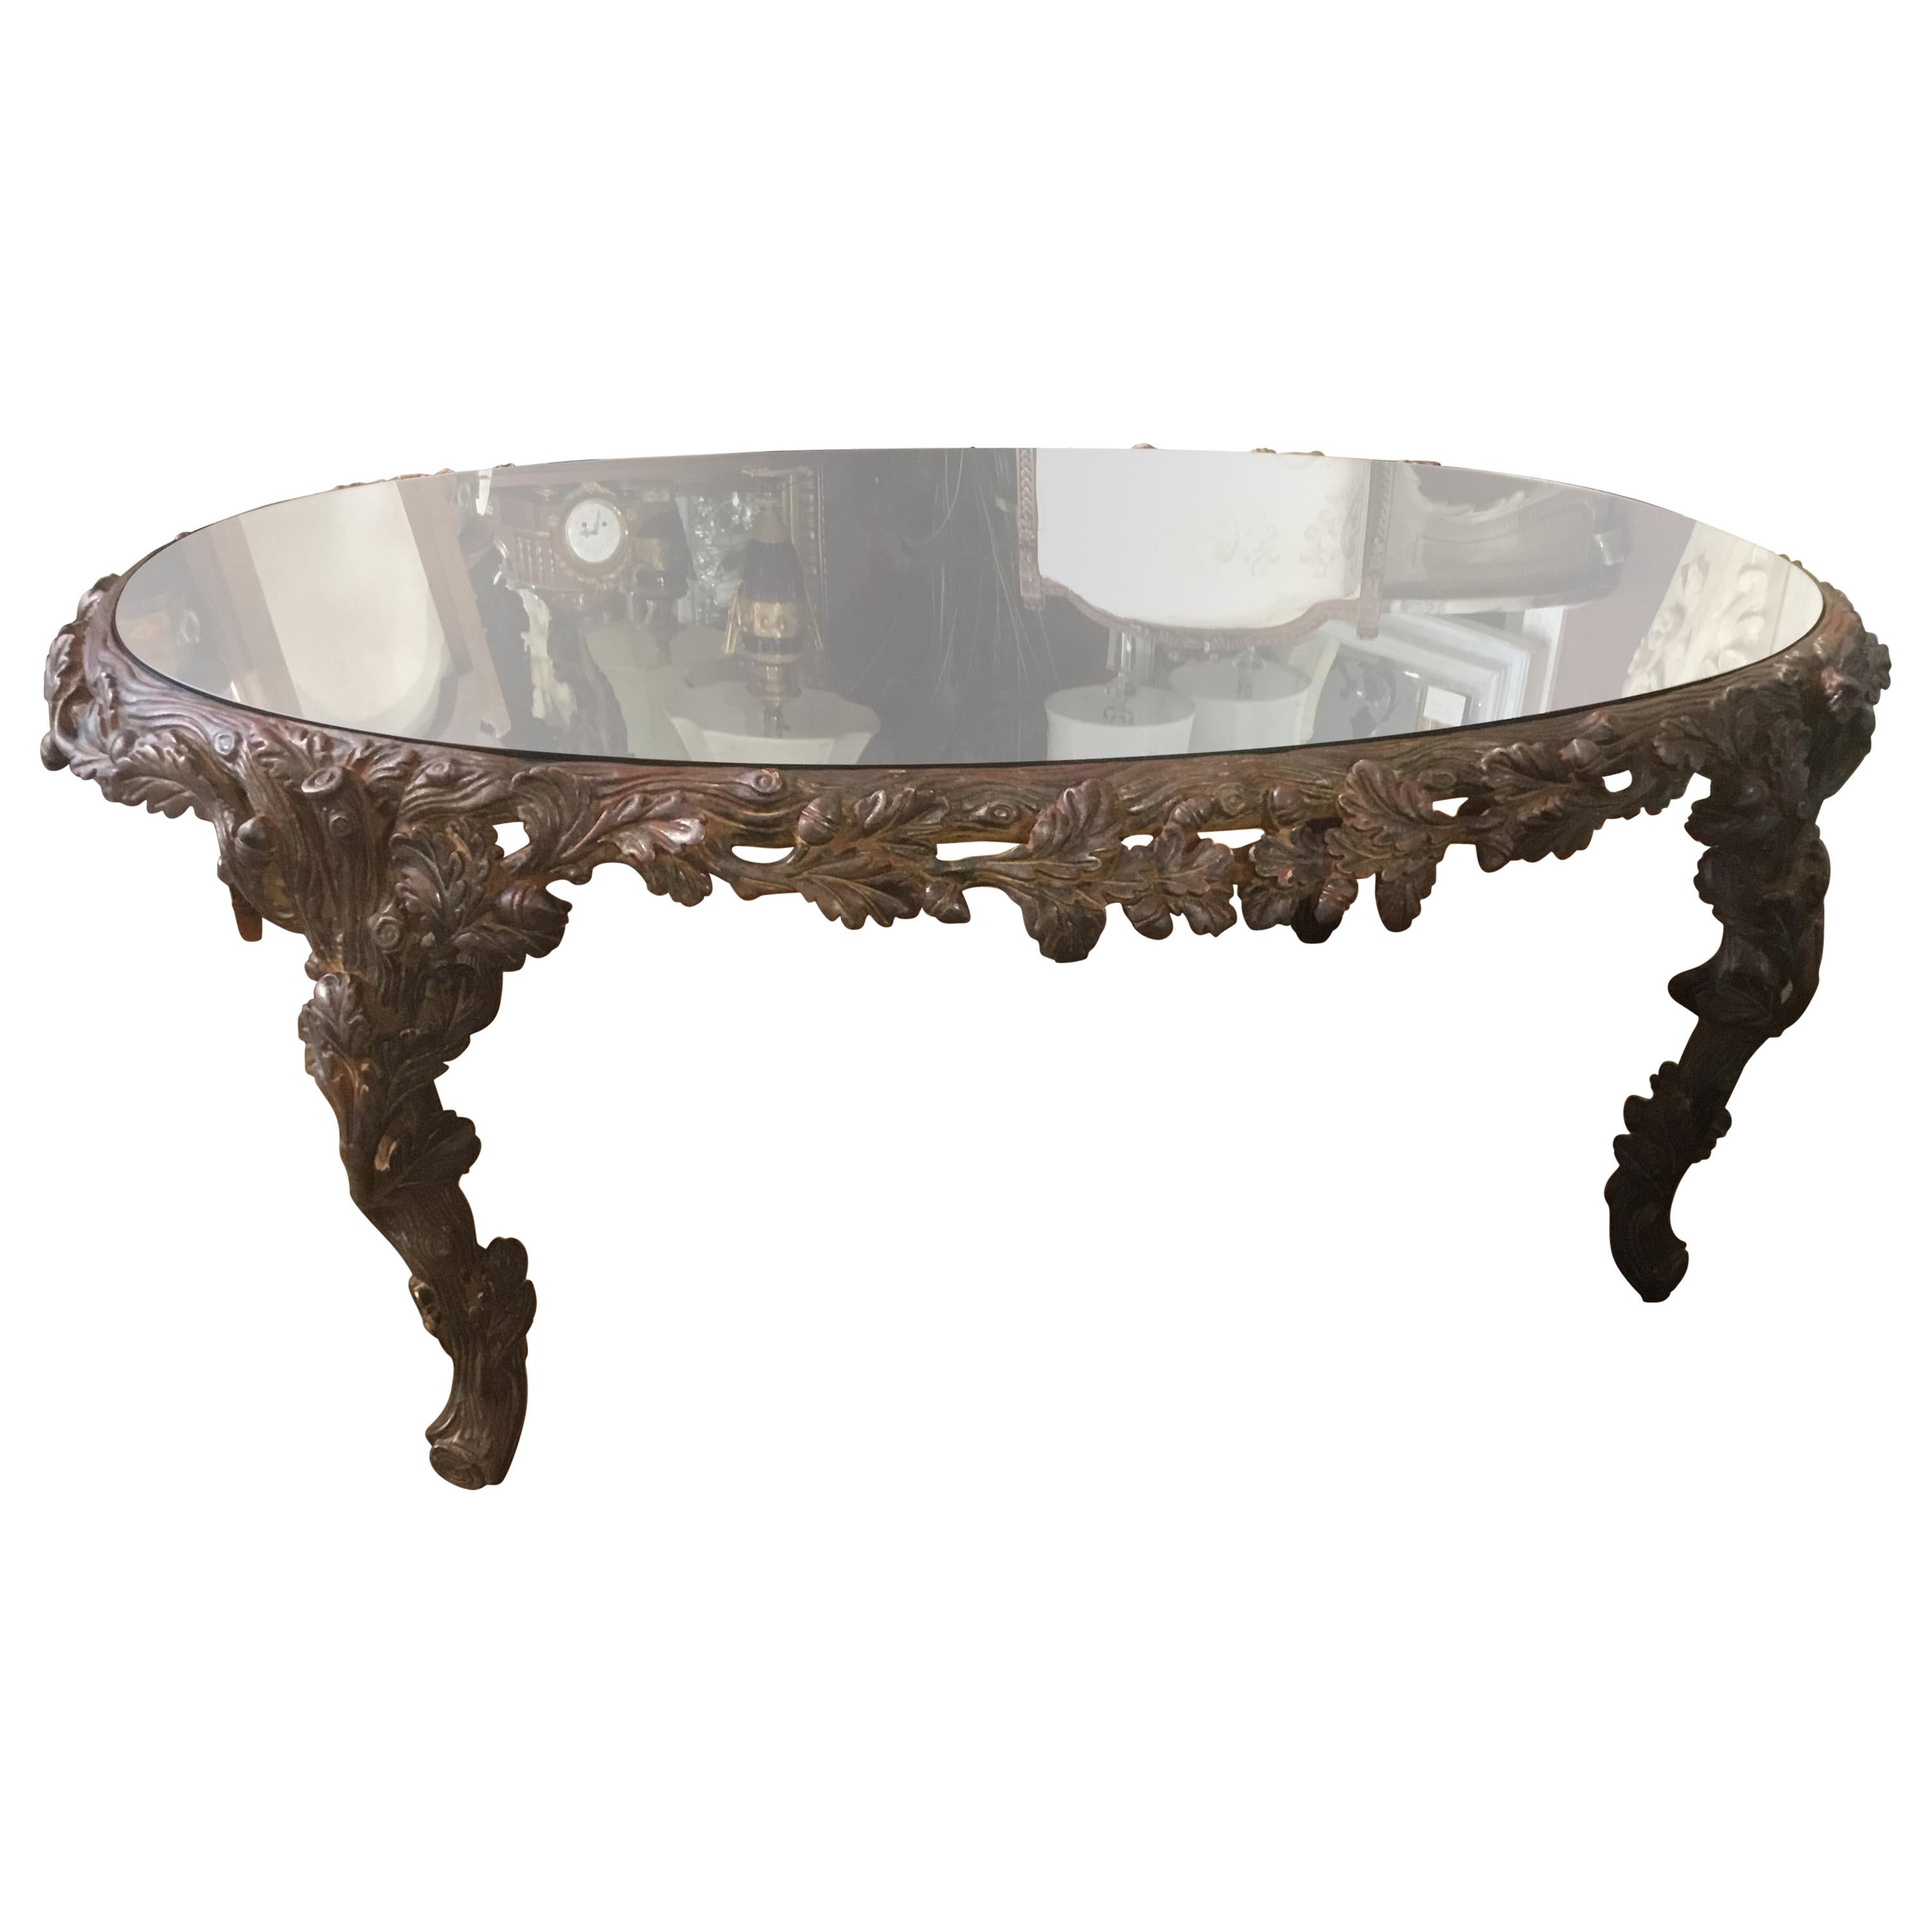 Italian Faux Bois Coffee Table with Bronze Antiqued Mirror Top, Oblong